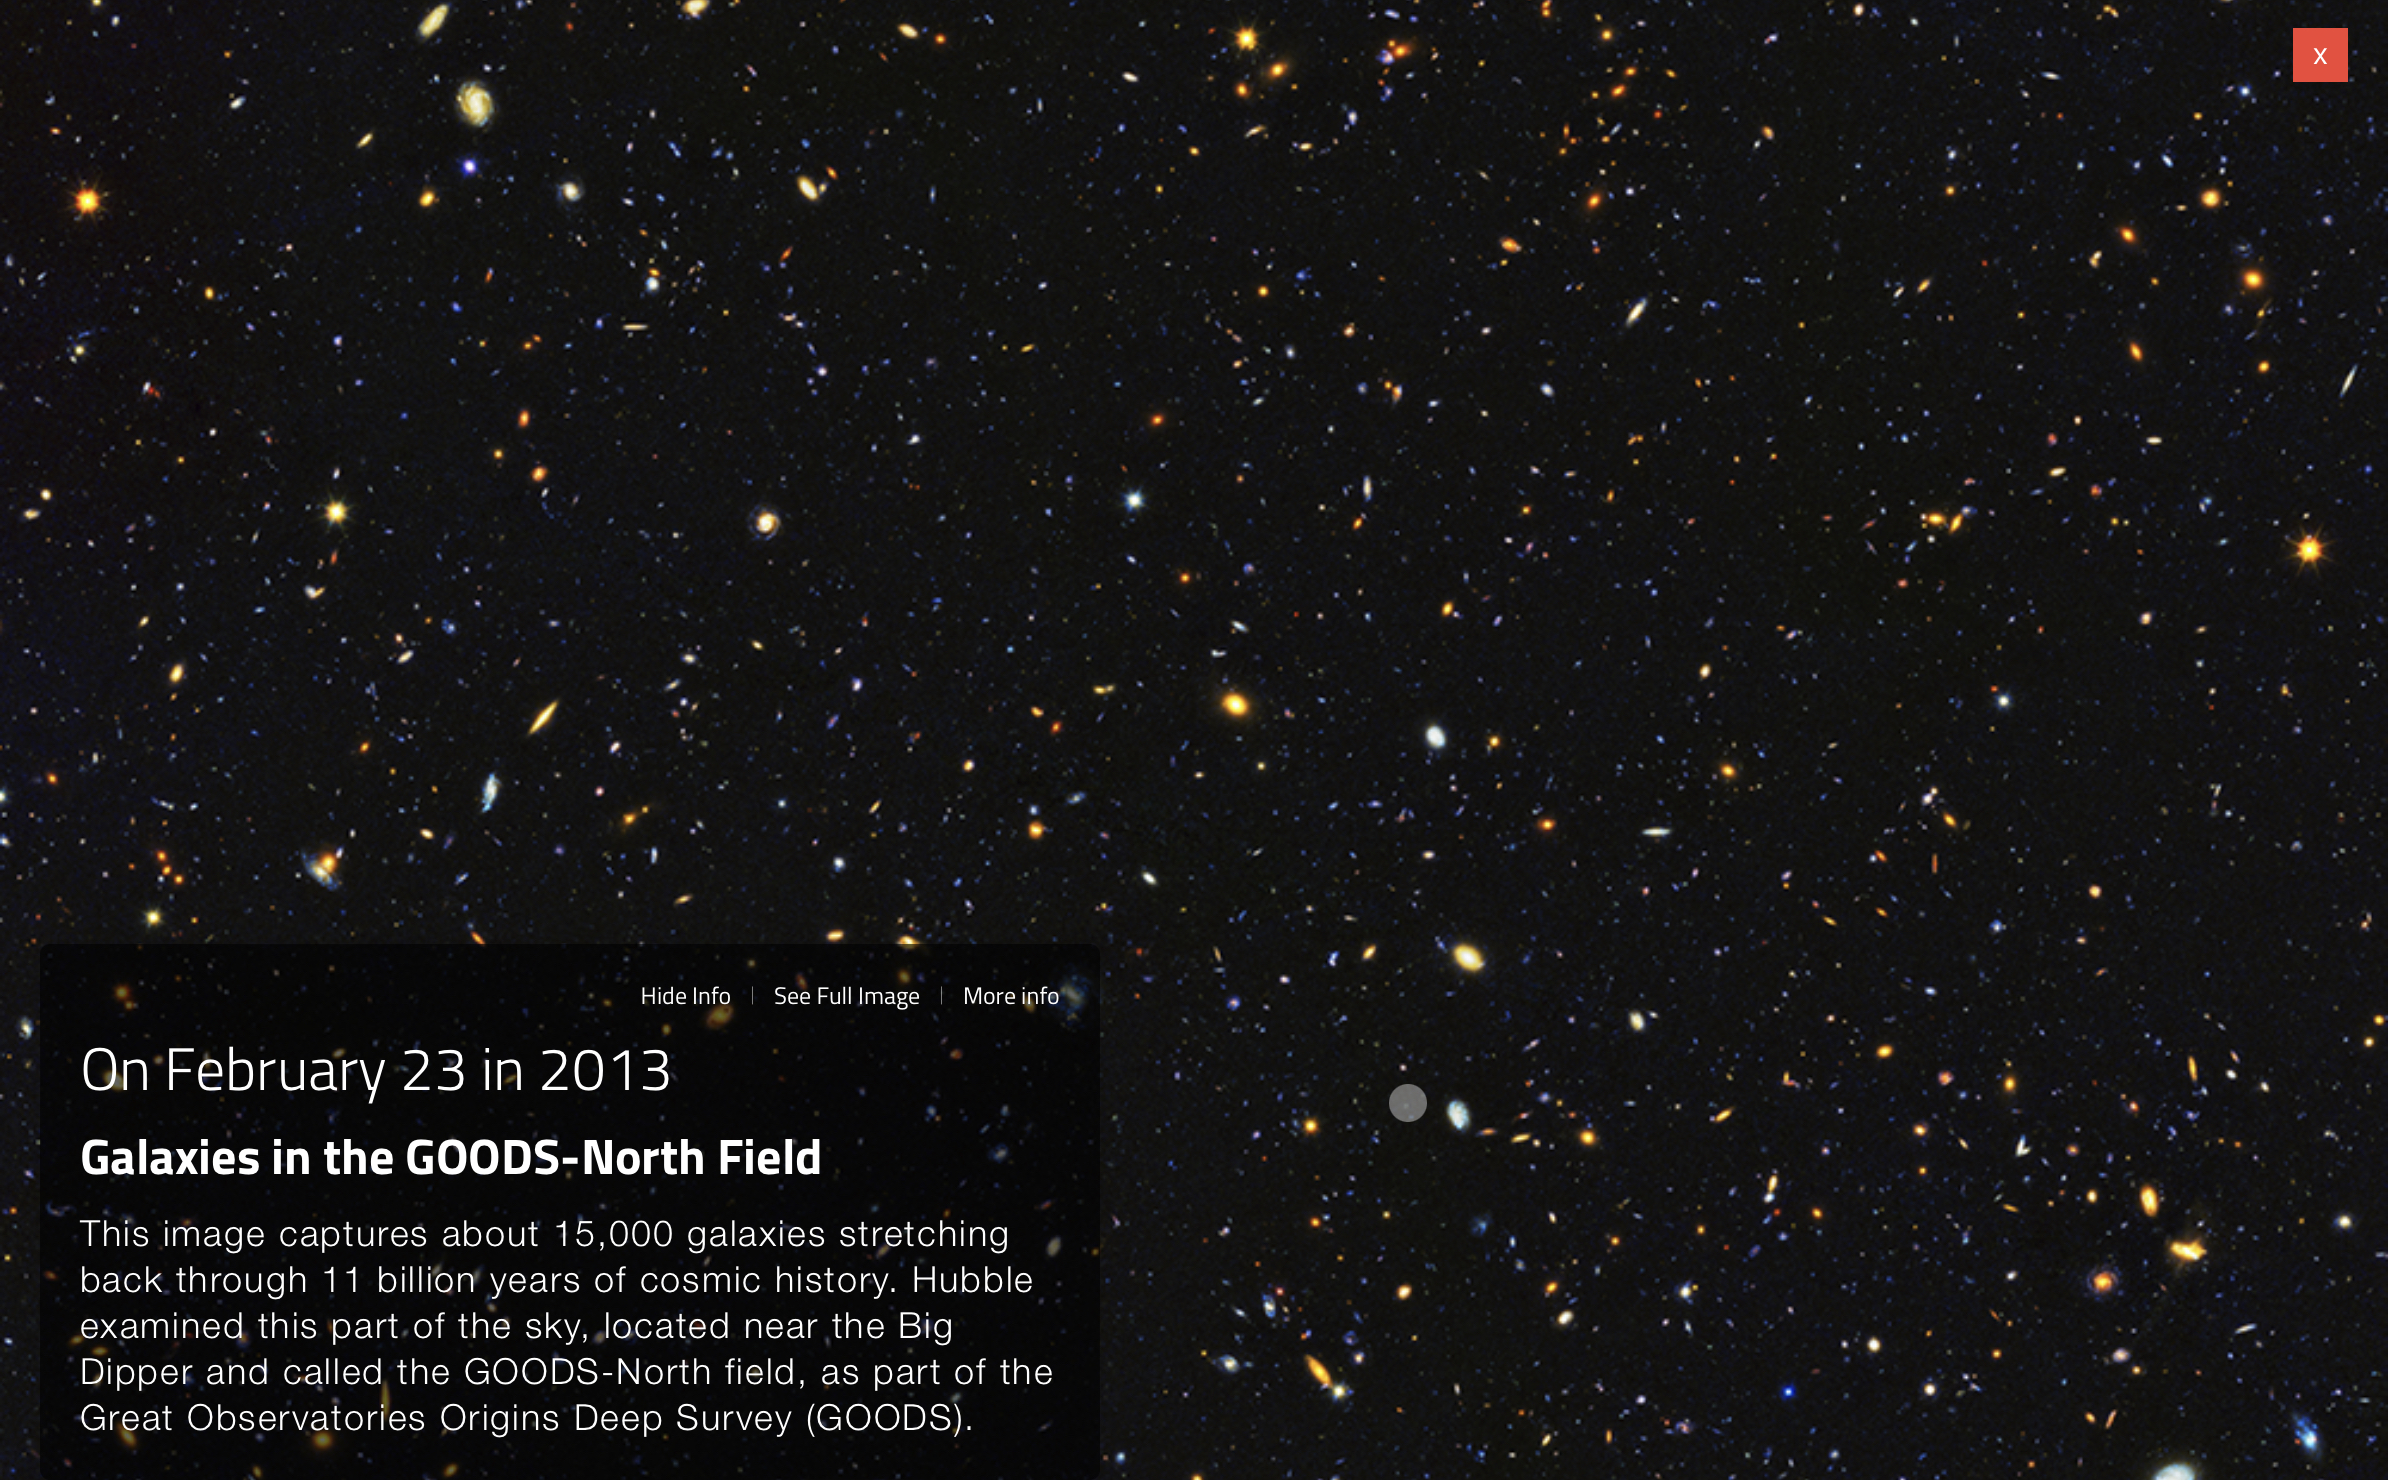 Snapshot of Hubble Telescope photo of galaxies in GOODS-North Field